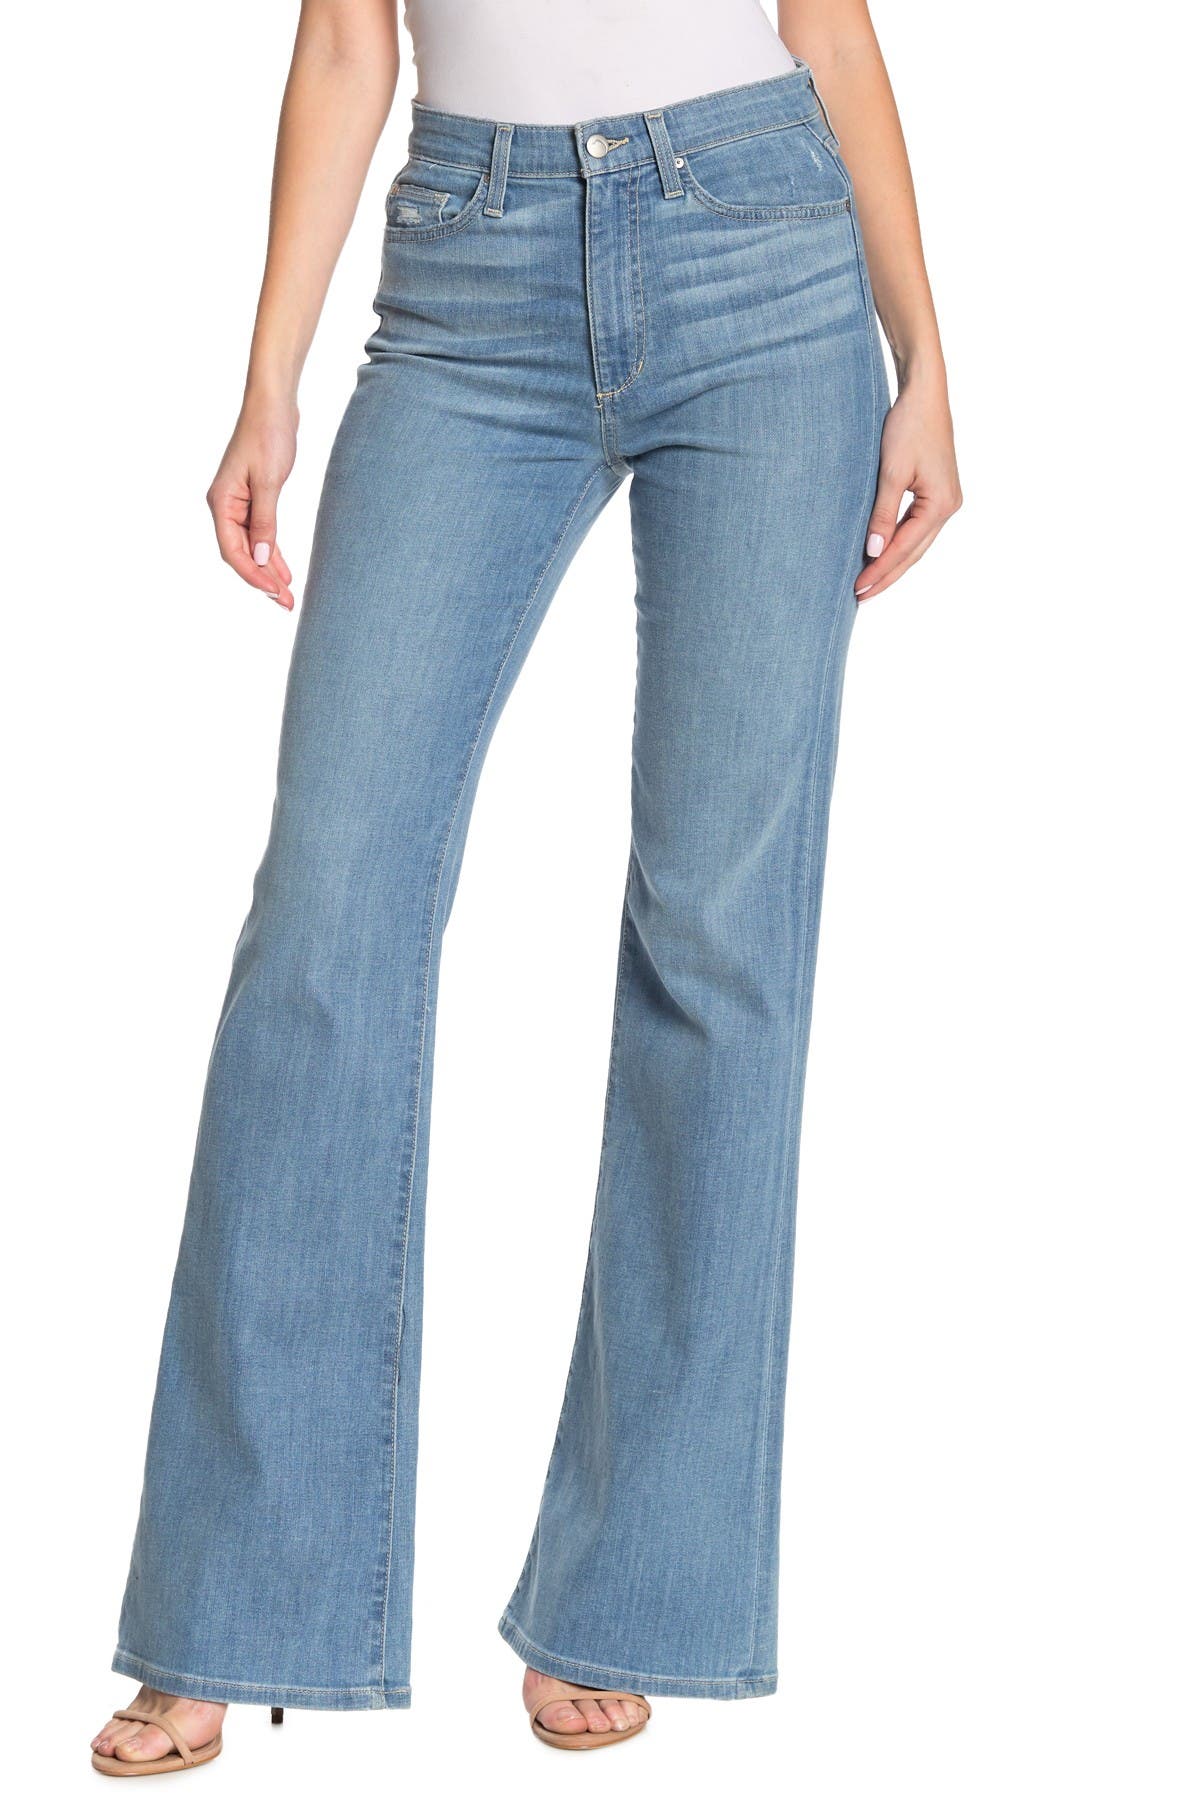 Joe's Jeans | Molly High Rise Flare Jeans | Nordstrom Rack